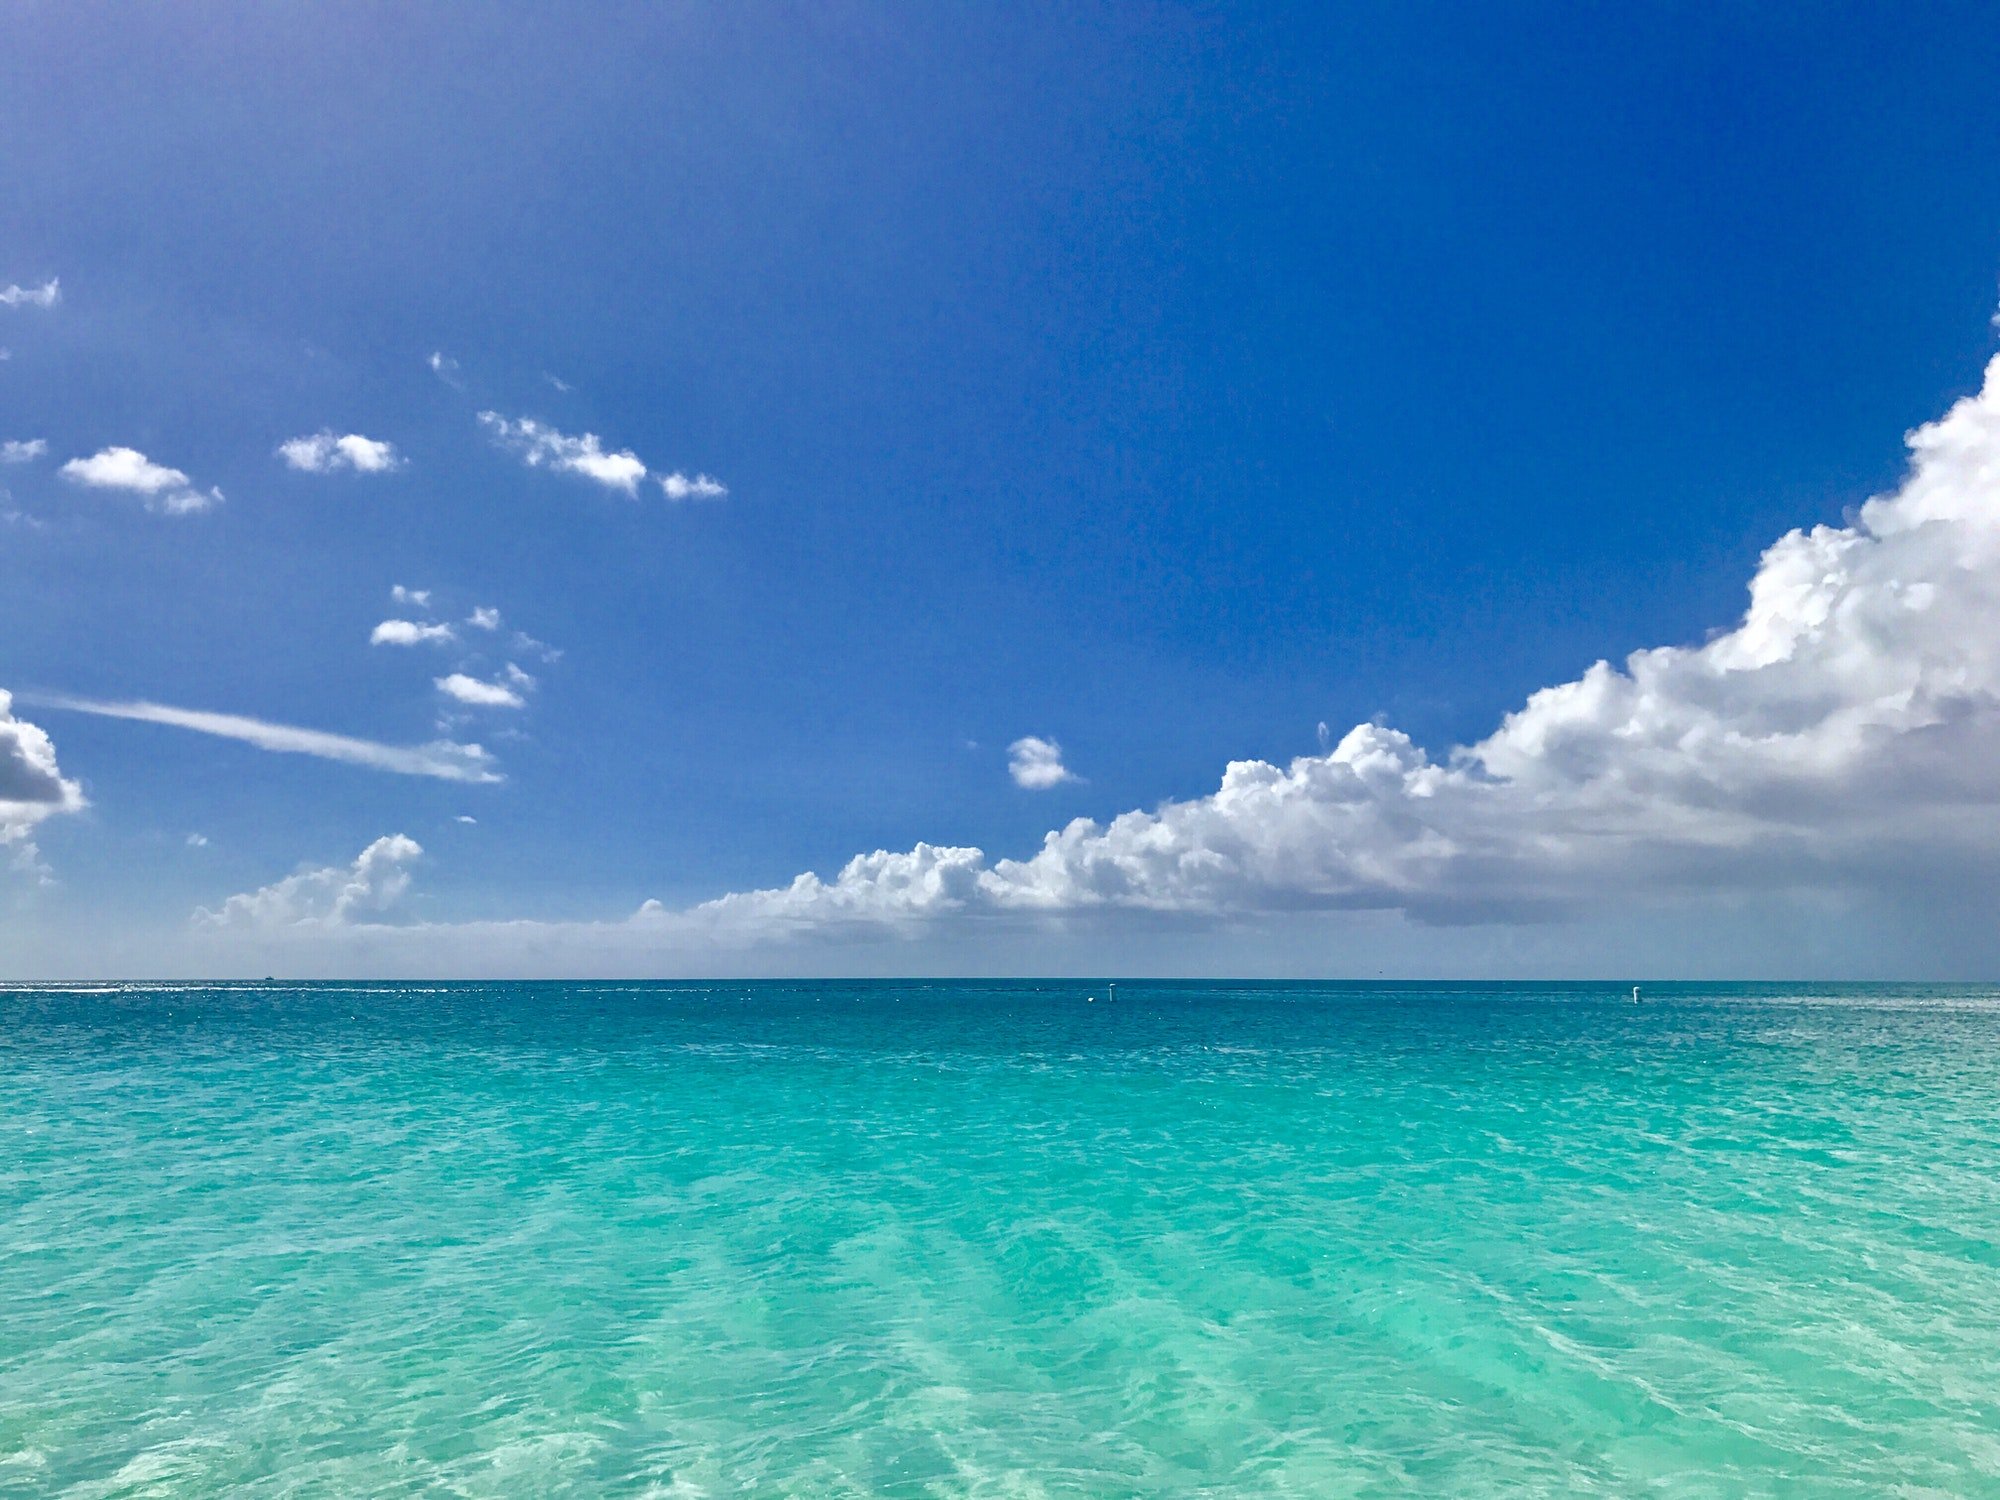 Turquoise water under the blue sky at Grace Bay, Turks and Caicos.